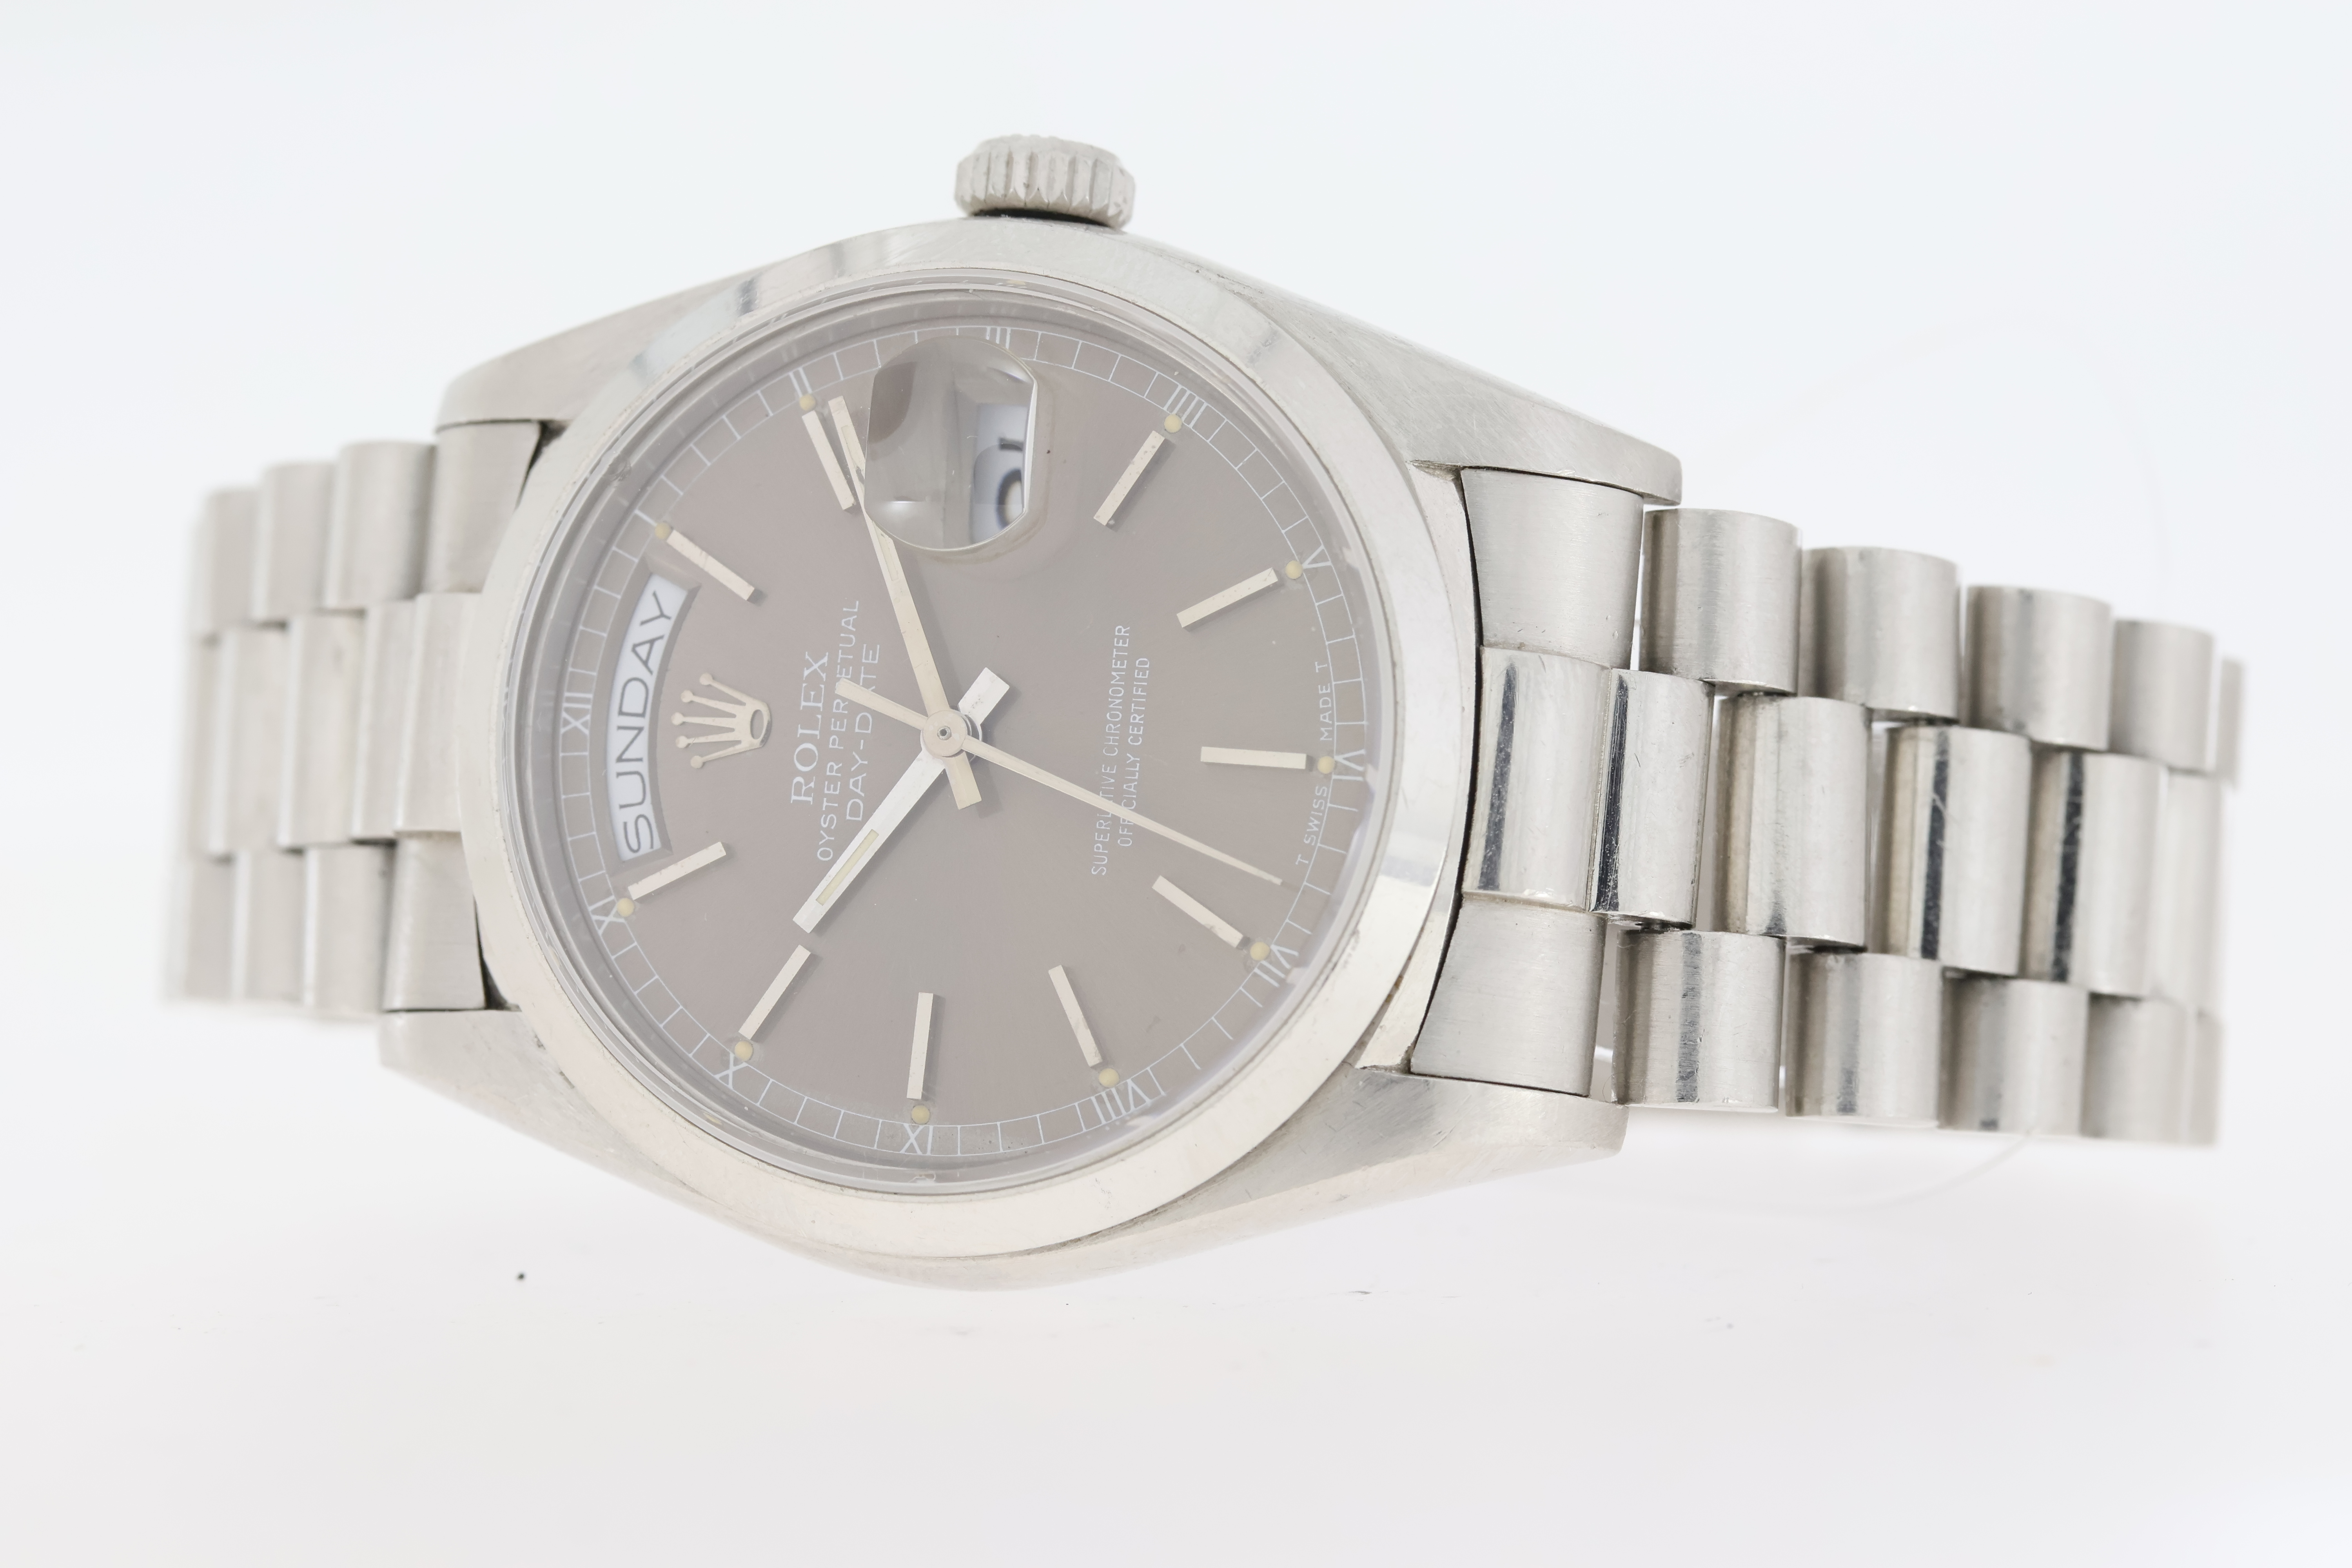 Platinum Rolex Day Date Reference 18026 with Box and Papers 1988 - Image 3 of 6